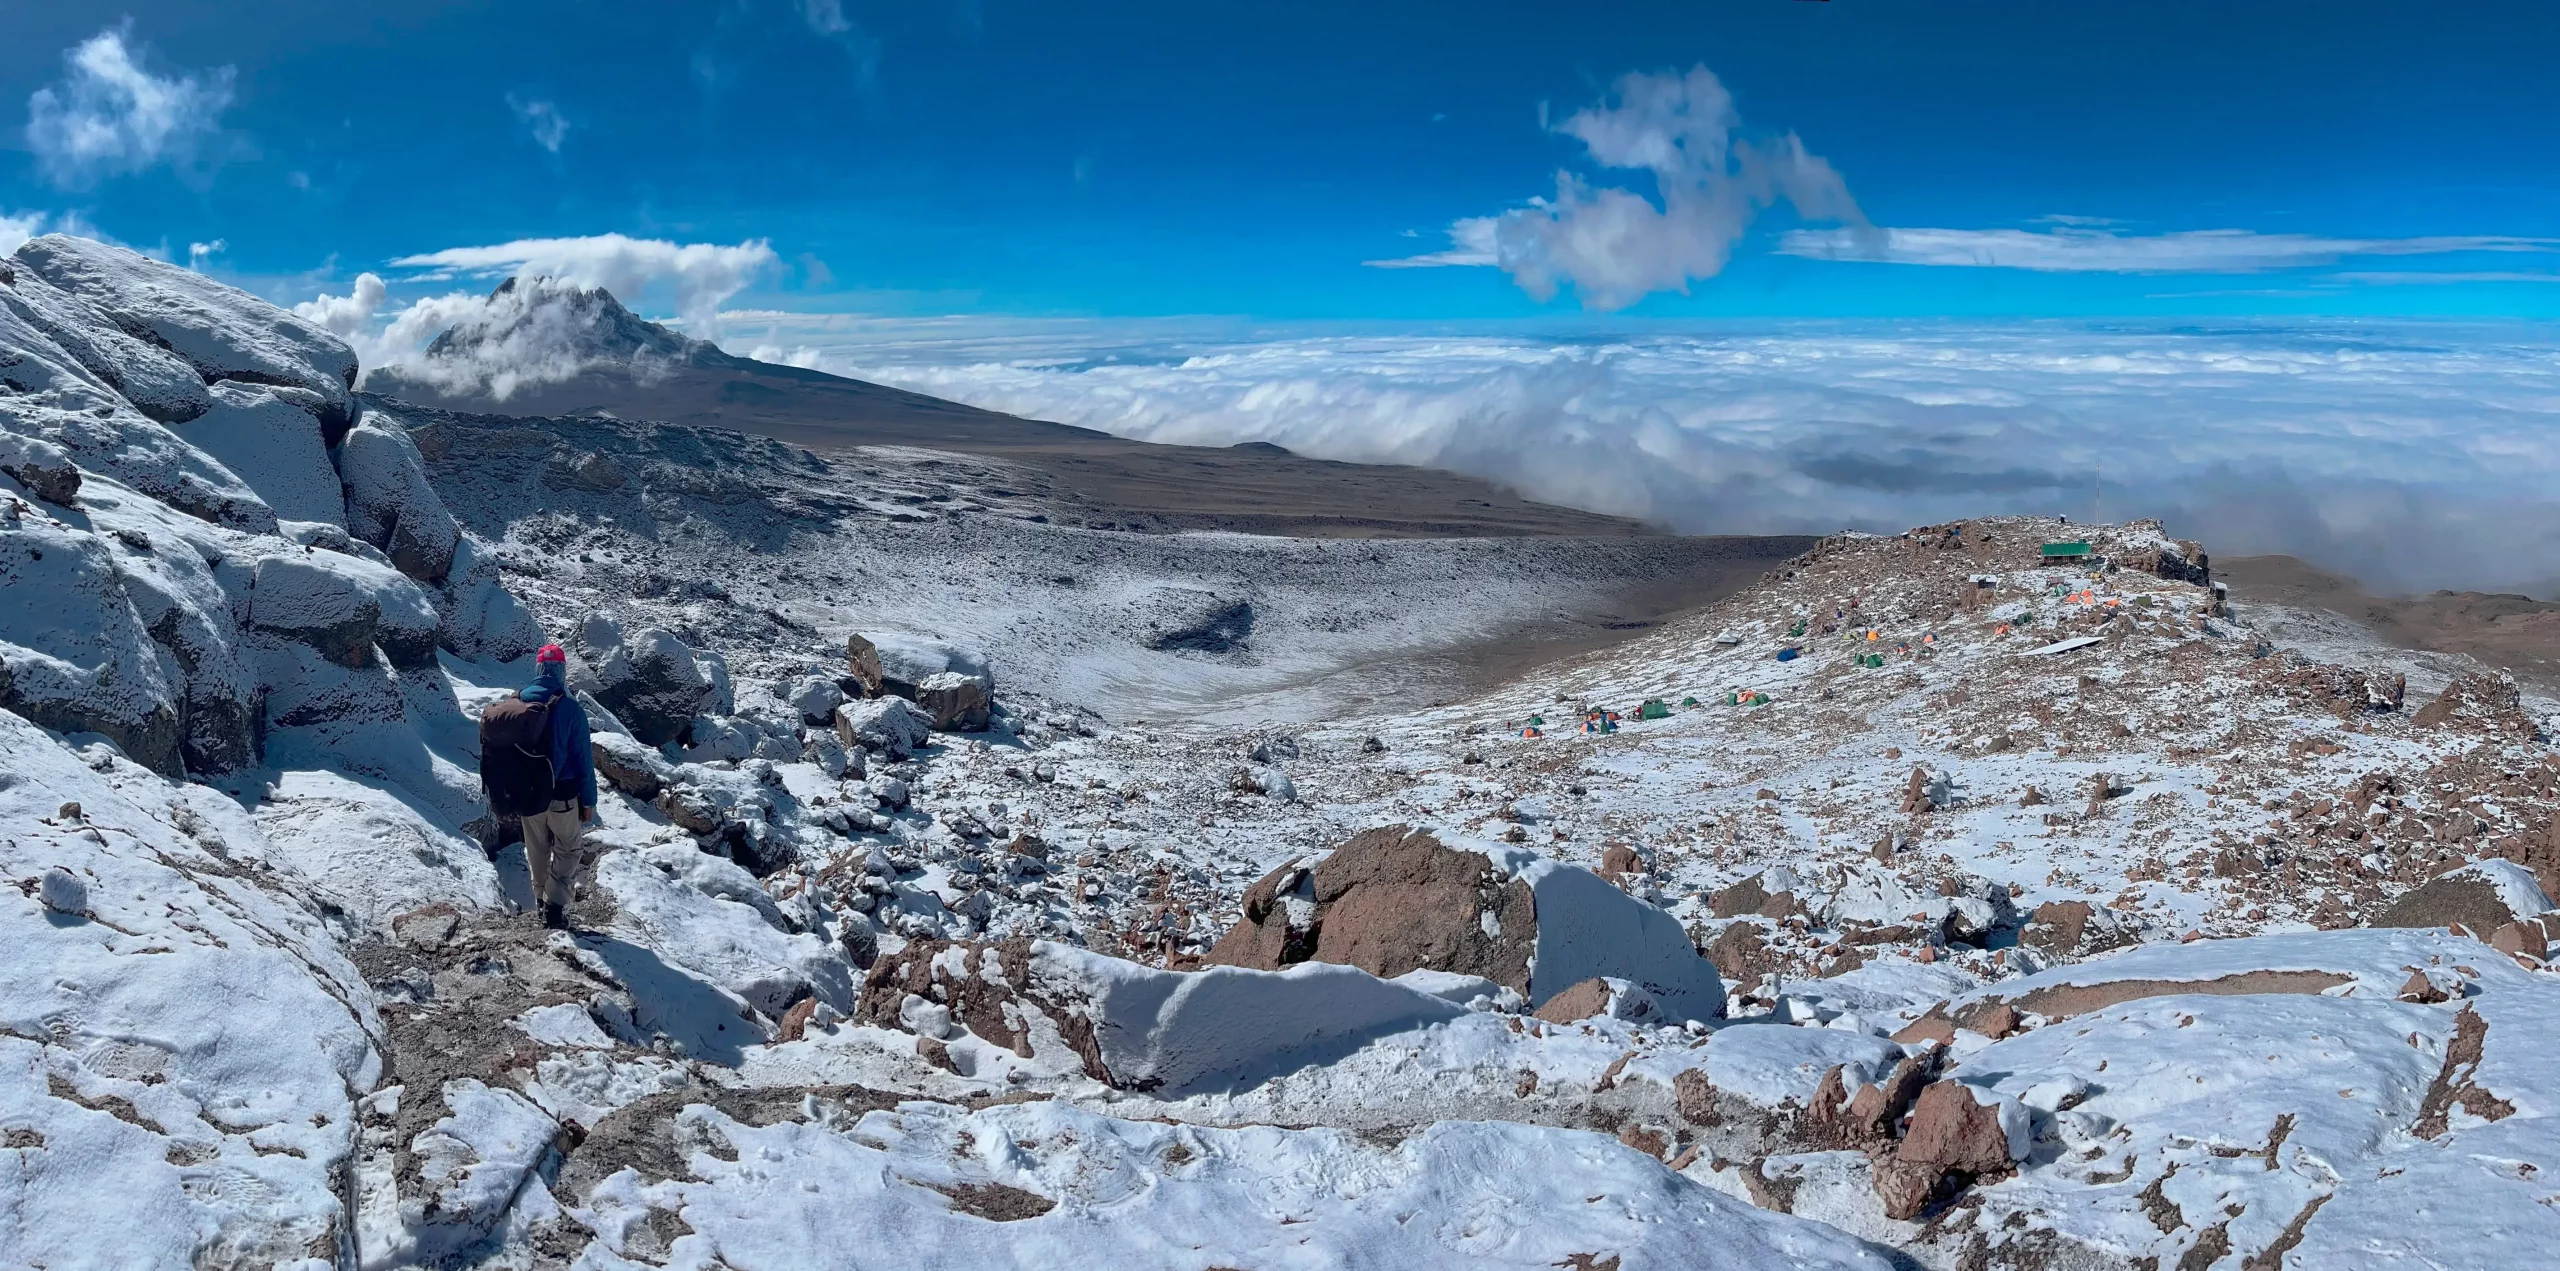 the magnificent view of snow and clouds at Kilimanjaro peak after trekking for 5 days